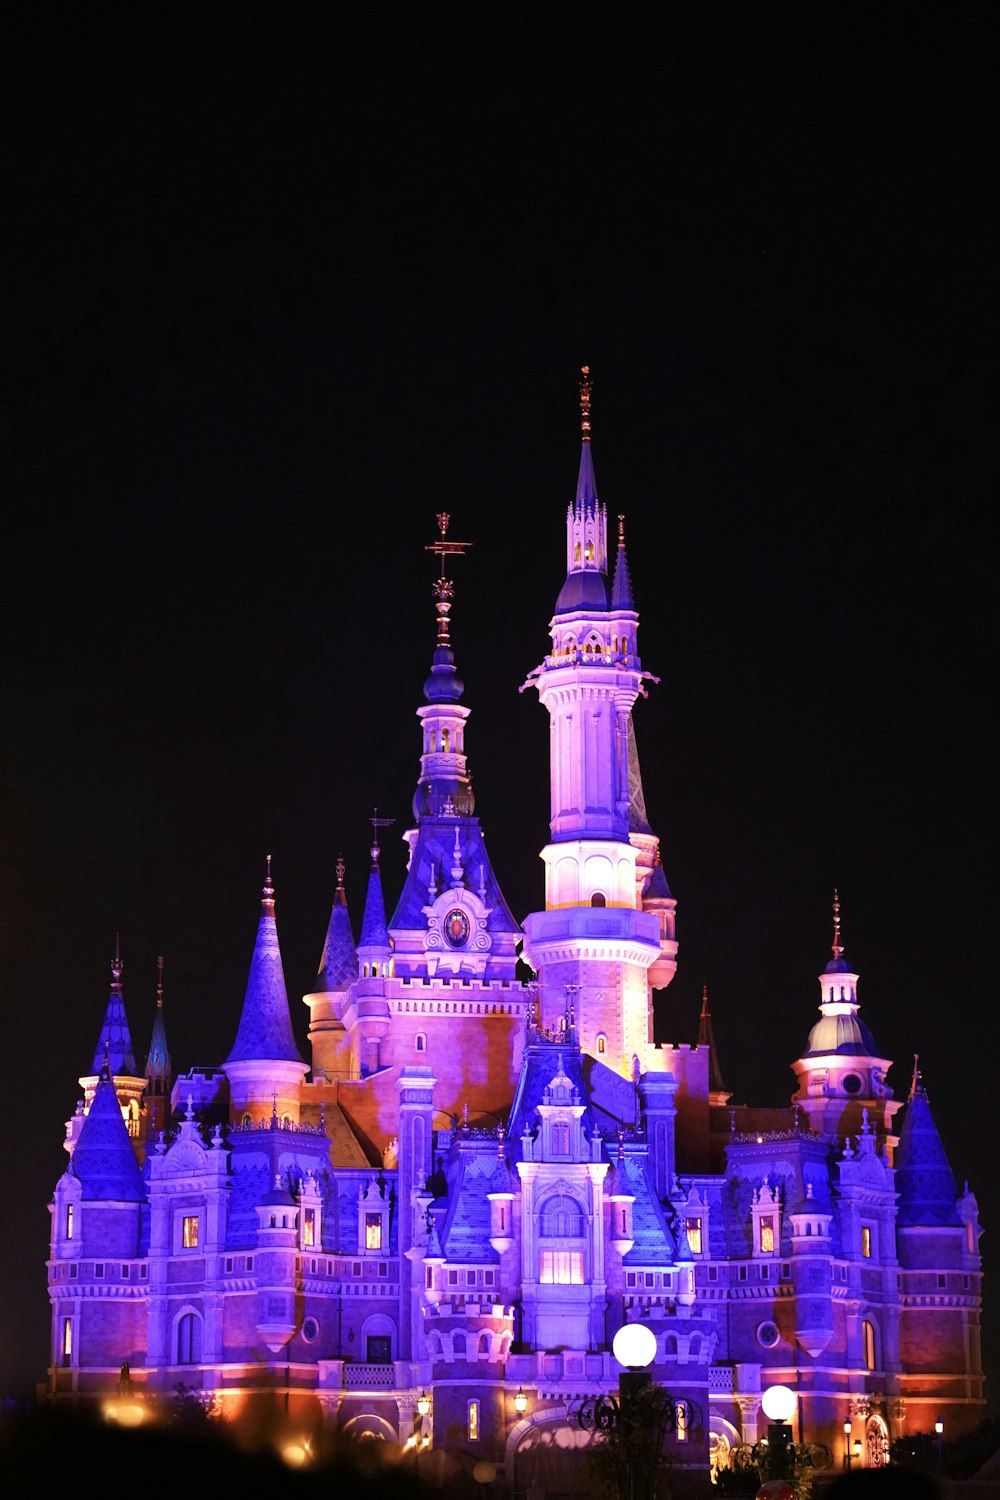 disney castle with lights during night time